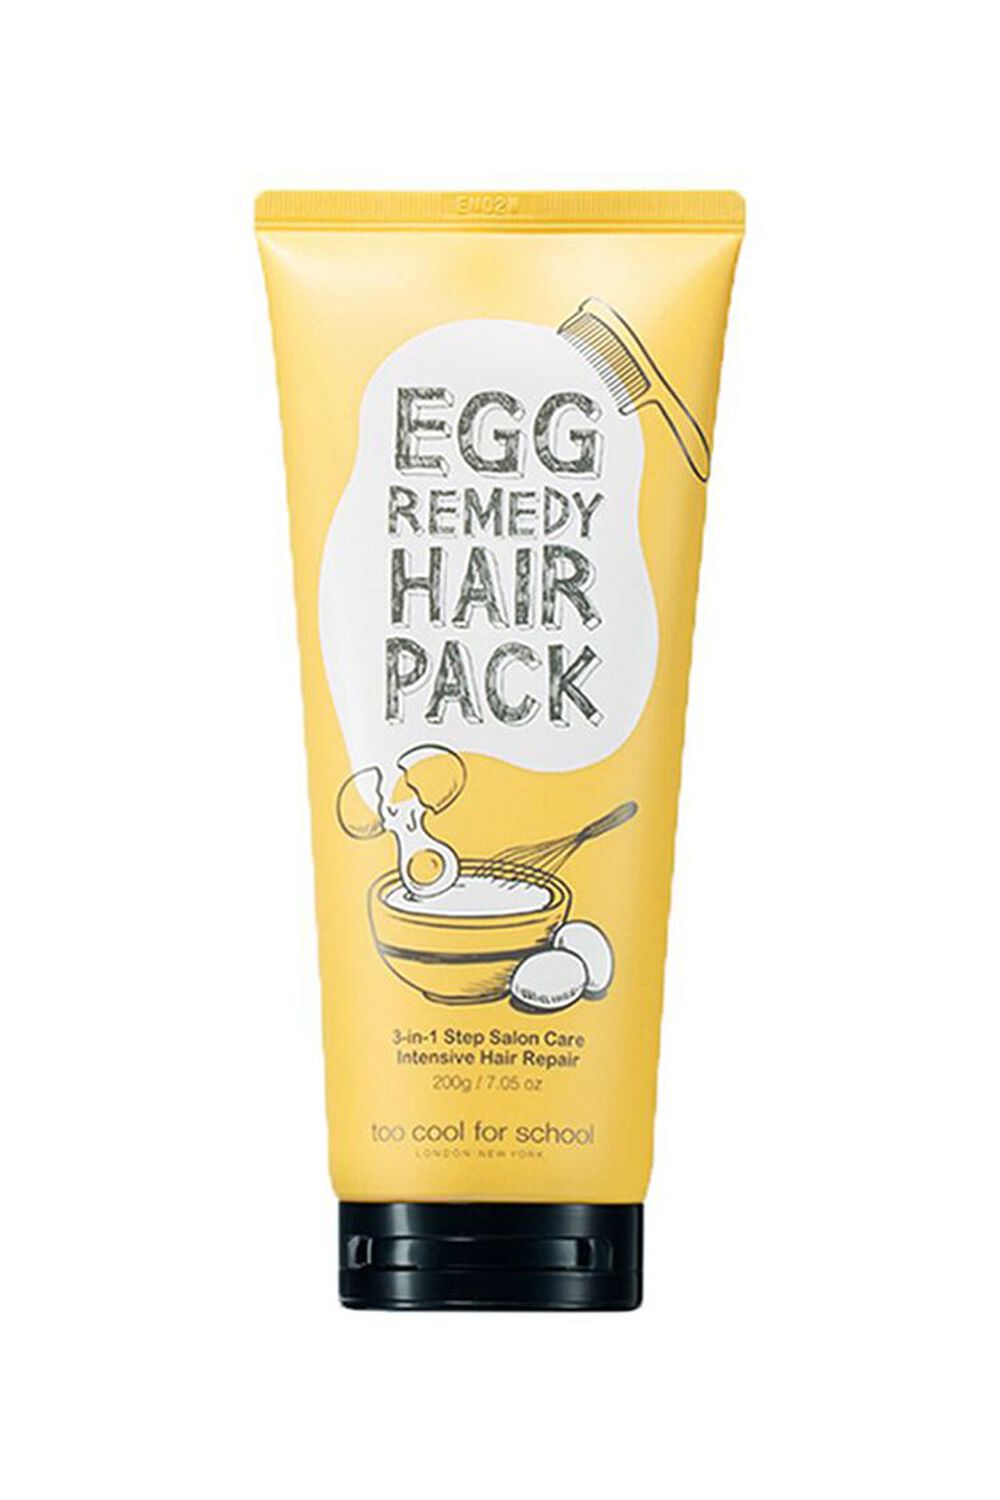 YELLOW Too Cool For School Egg Remedy Hair Pack, image 1